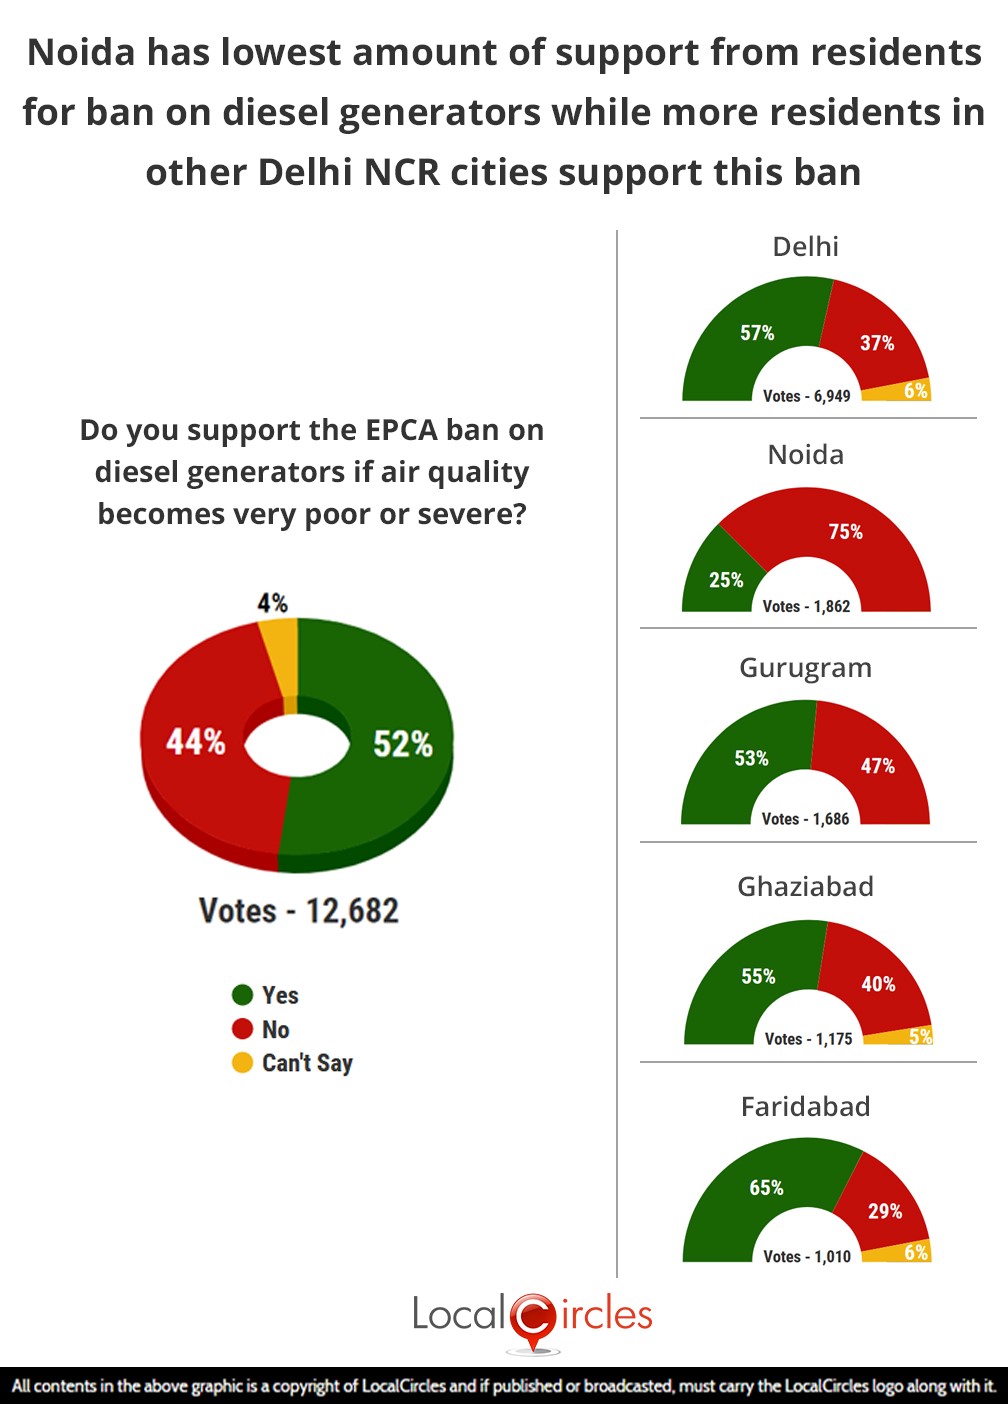 LocalCircles Poll - Noida has lowest amount of support from residents for ban on diesel generators while more residents in other Delhi NCR cities support this ban